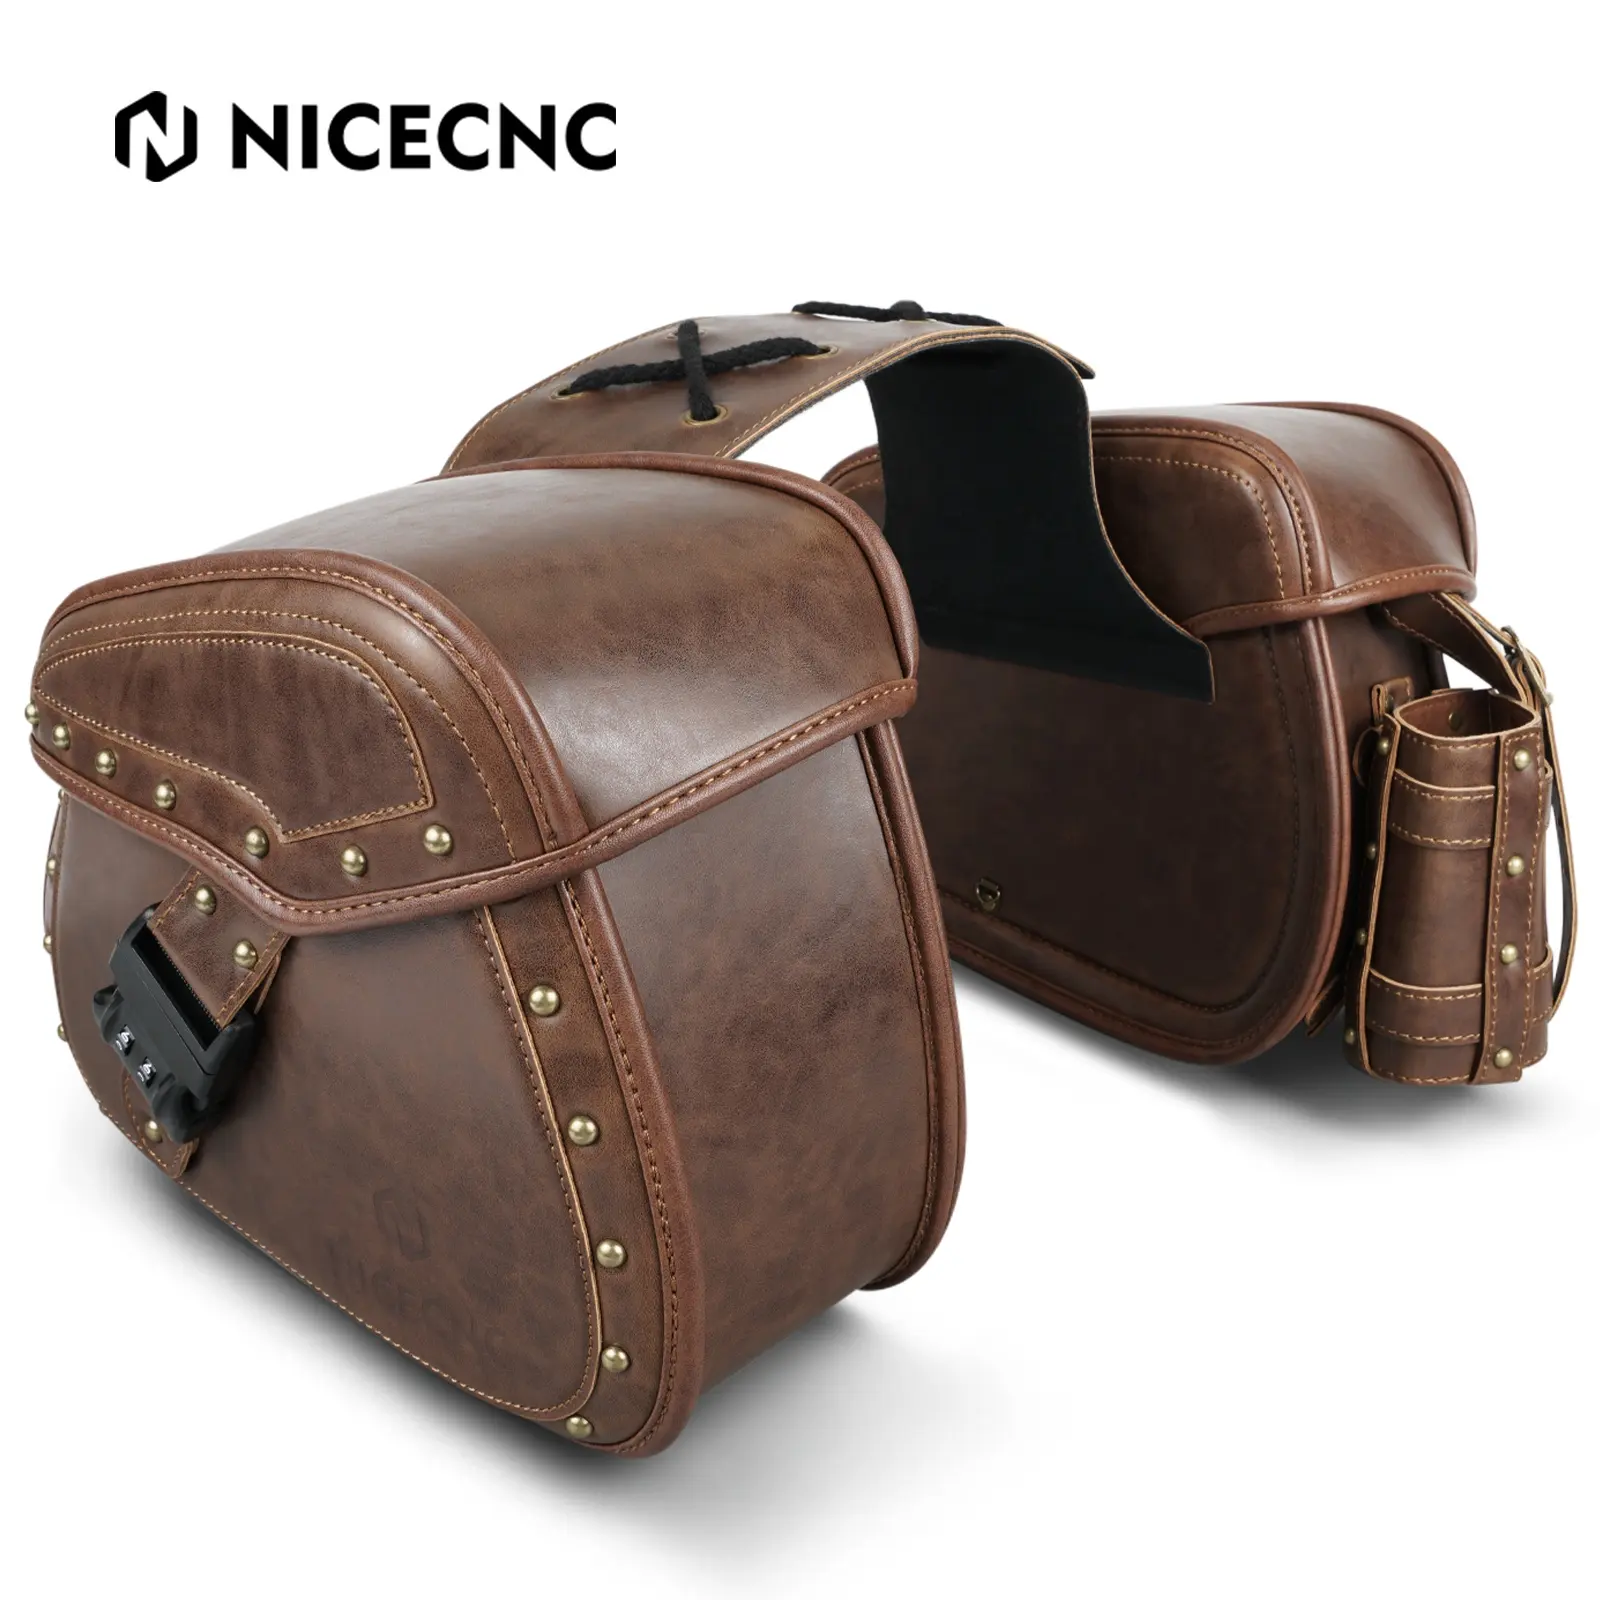 NiceCNC Motorcycle Saddle Side Tool Bag Luggage Bags For Harley Sportster XL 883 XL 1200